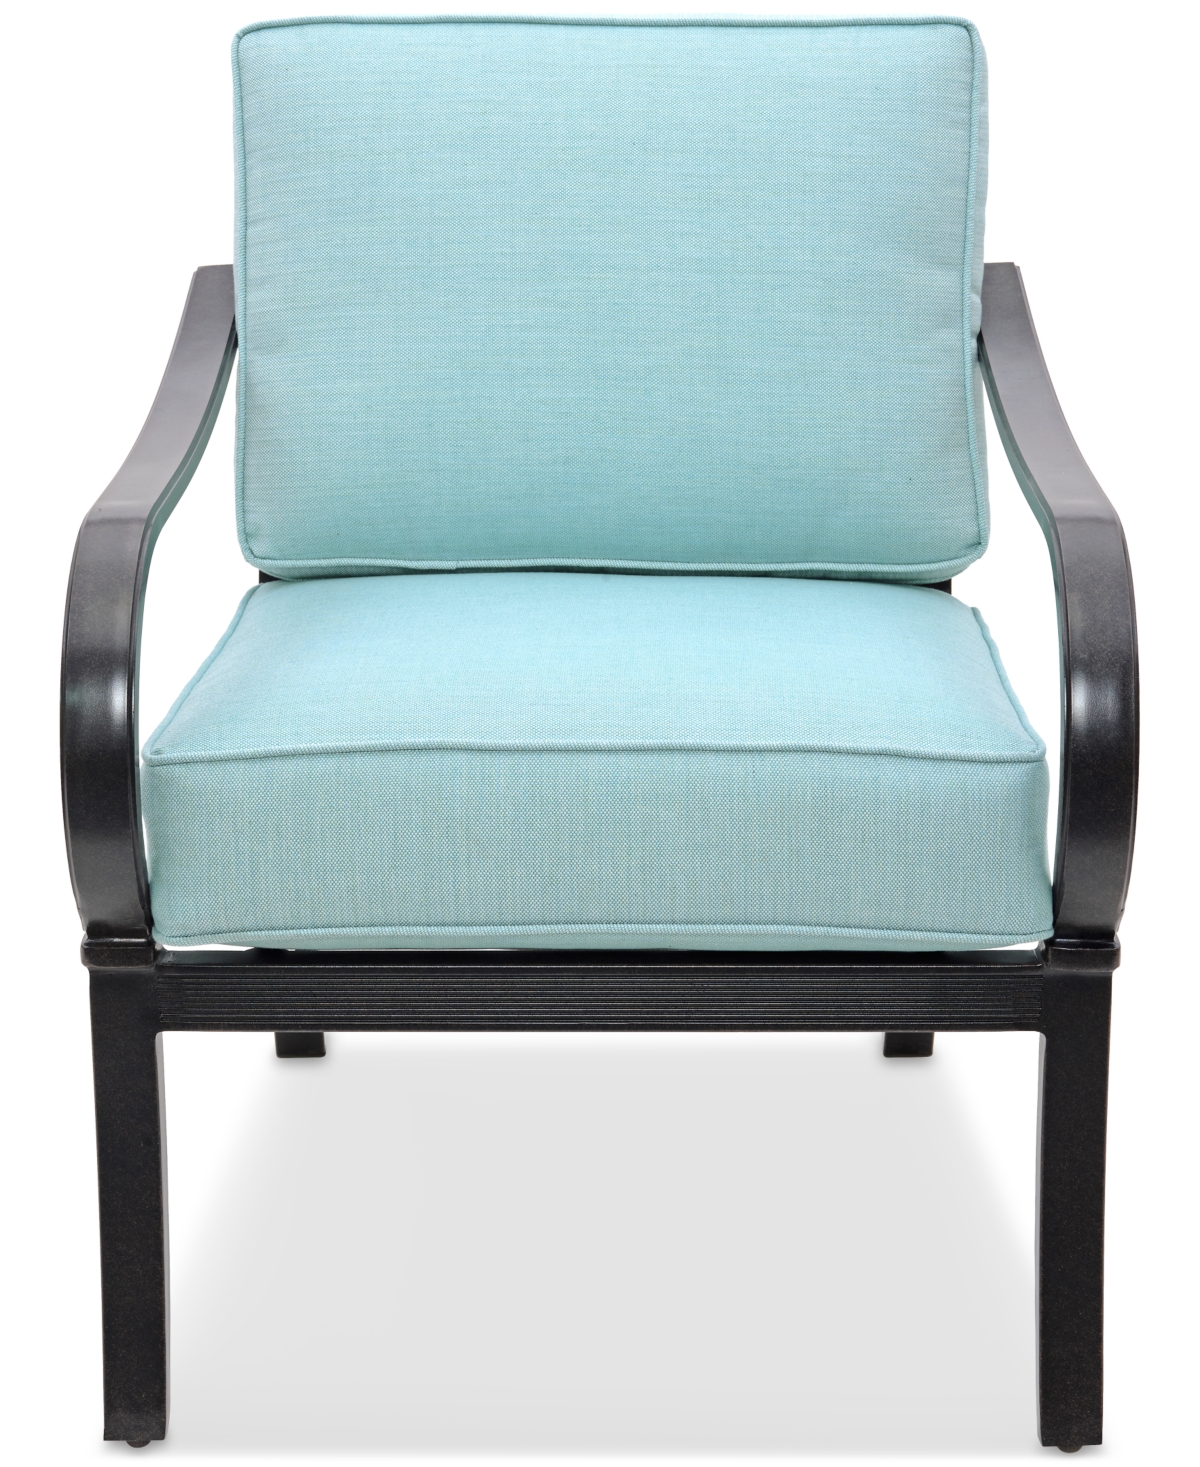 Agio St Croix Outdoor Lounge Chair In Spa Light Blue